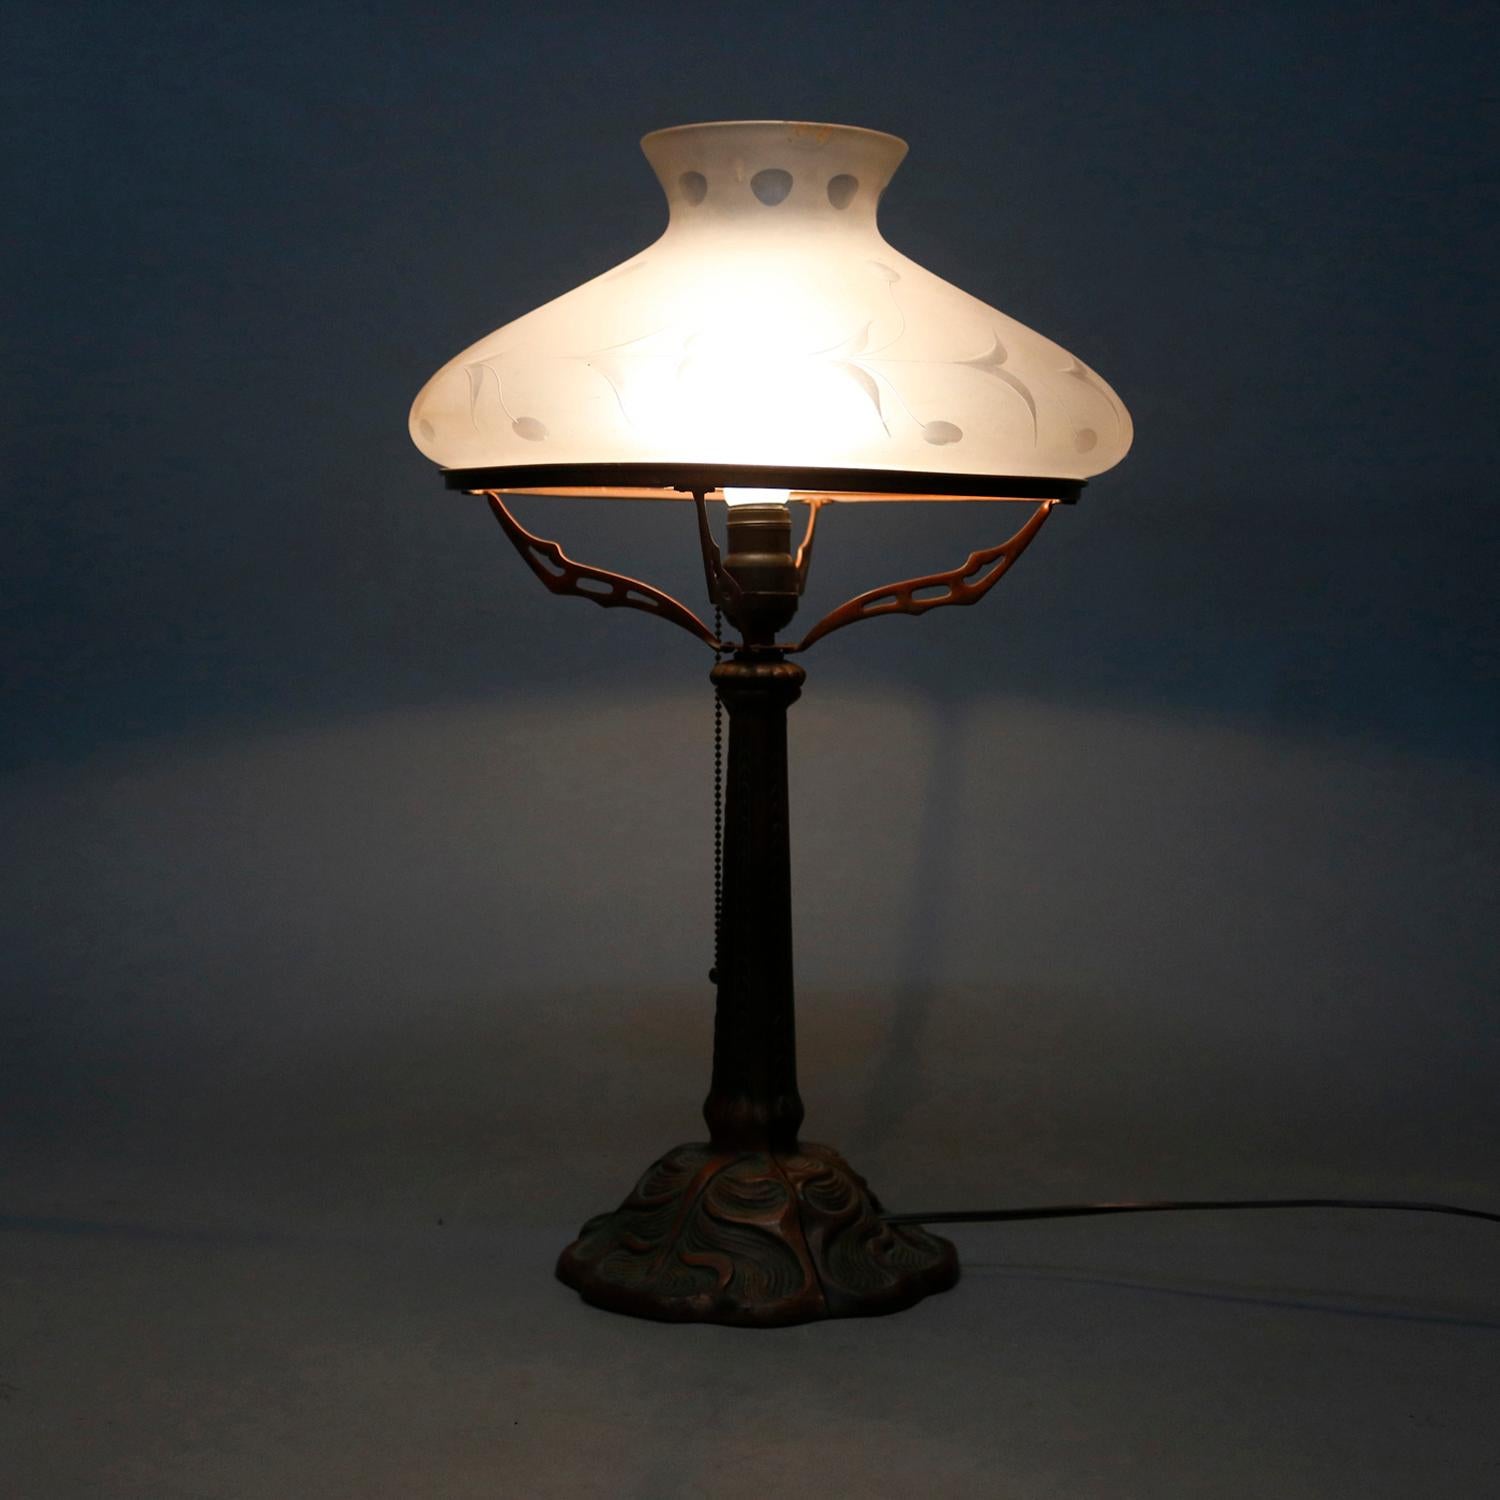 An Arts & Crafts single socket table lamp offers cast coppered metal base with Art Nouveau naturalistic elements surmounted by an acid etched tam-o-shanter shade, professionally re-wired, circa 1920

Measures: 23